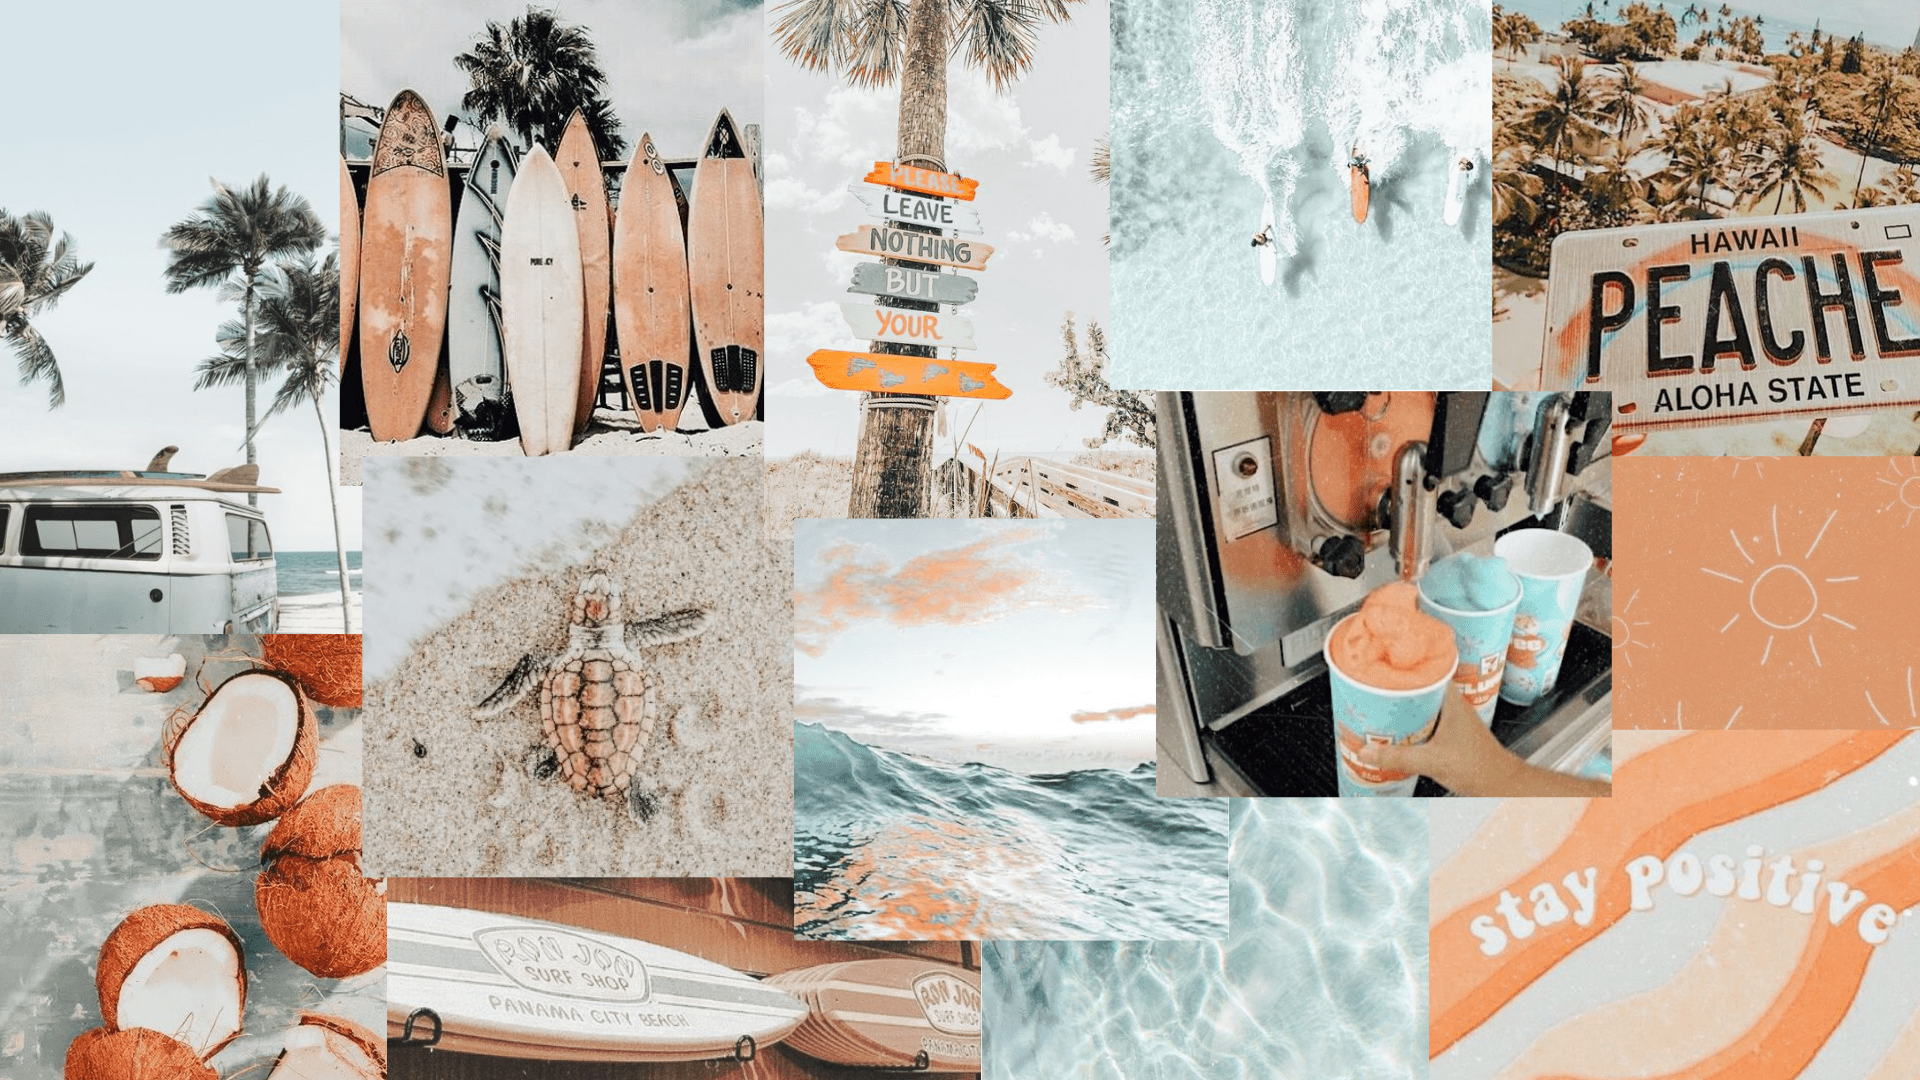 A collage of surfing photos including surfboards, coconuts, and beach signs. - Beach